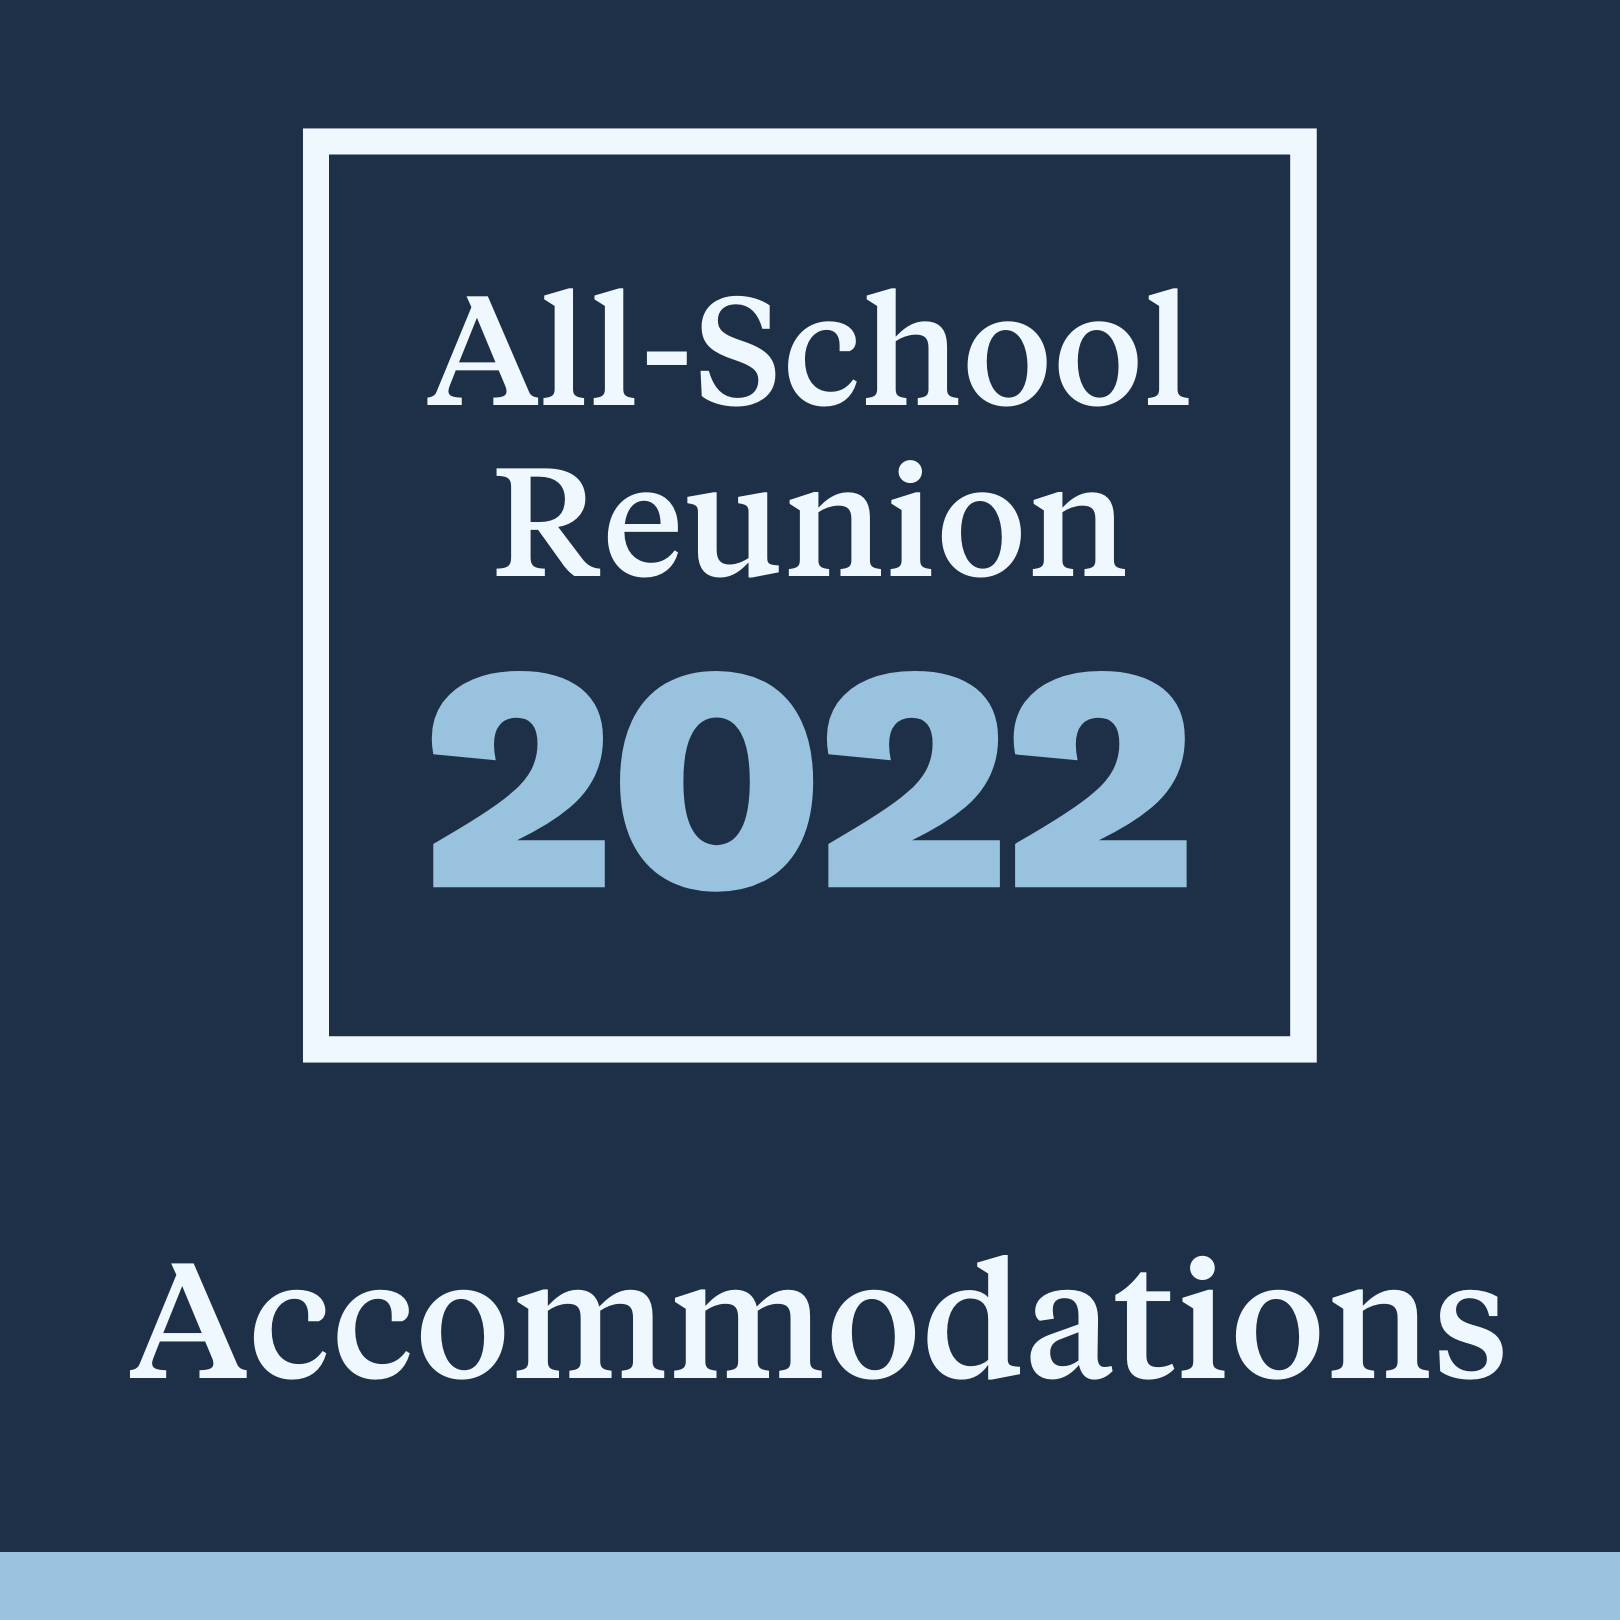 All-School Reunion 2022 Hotels and Room Blocks